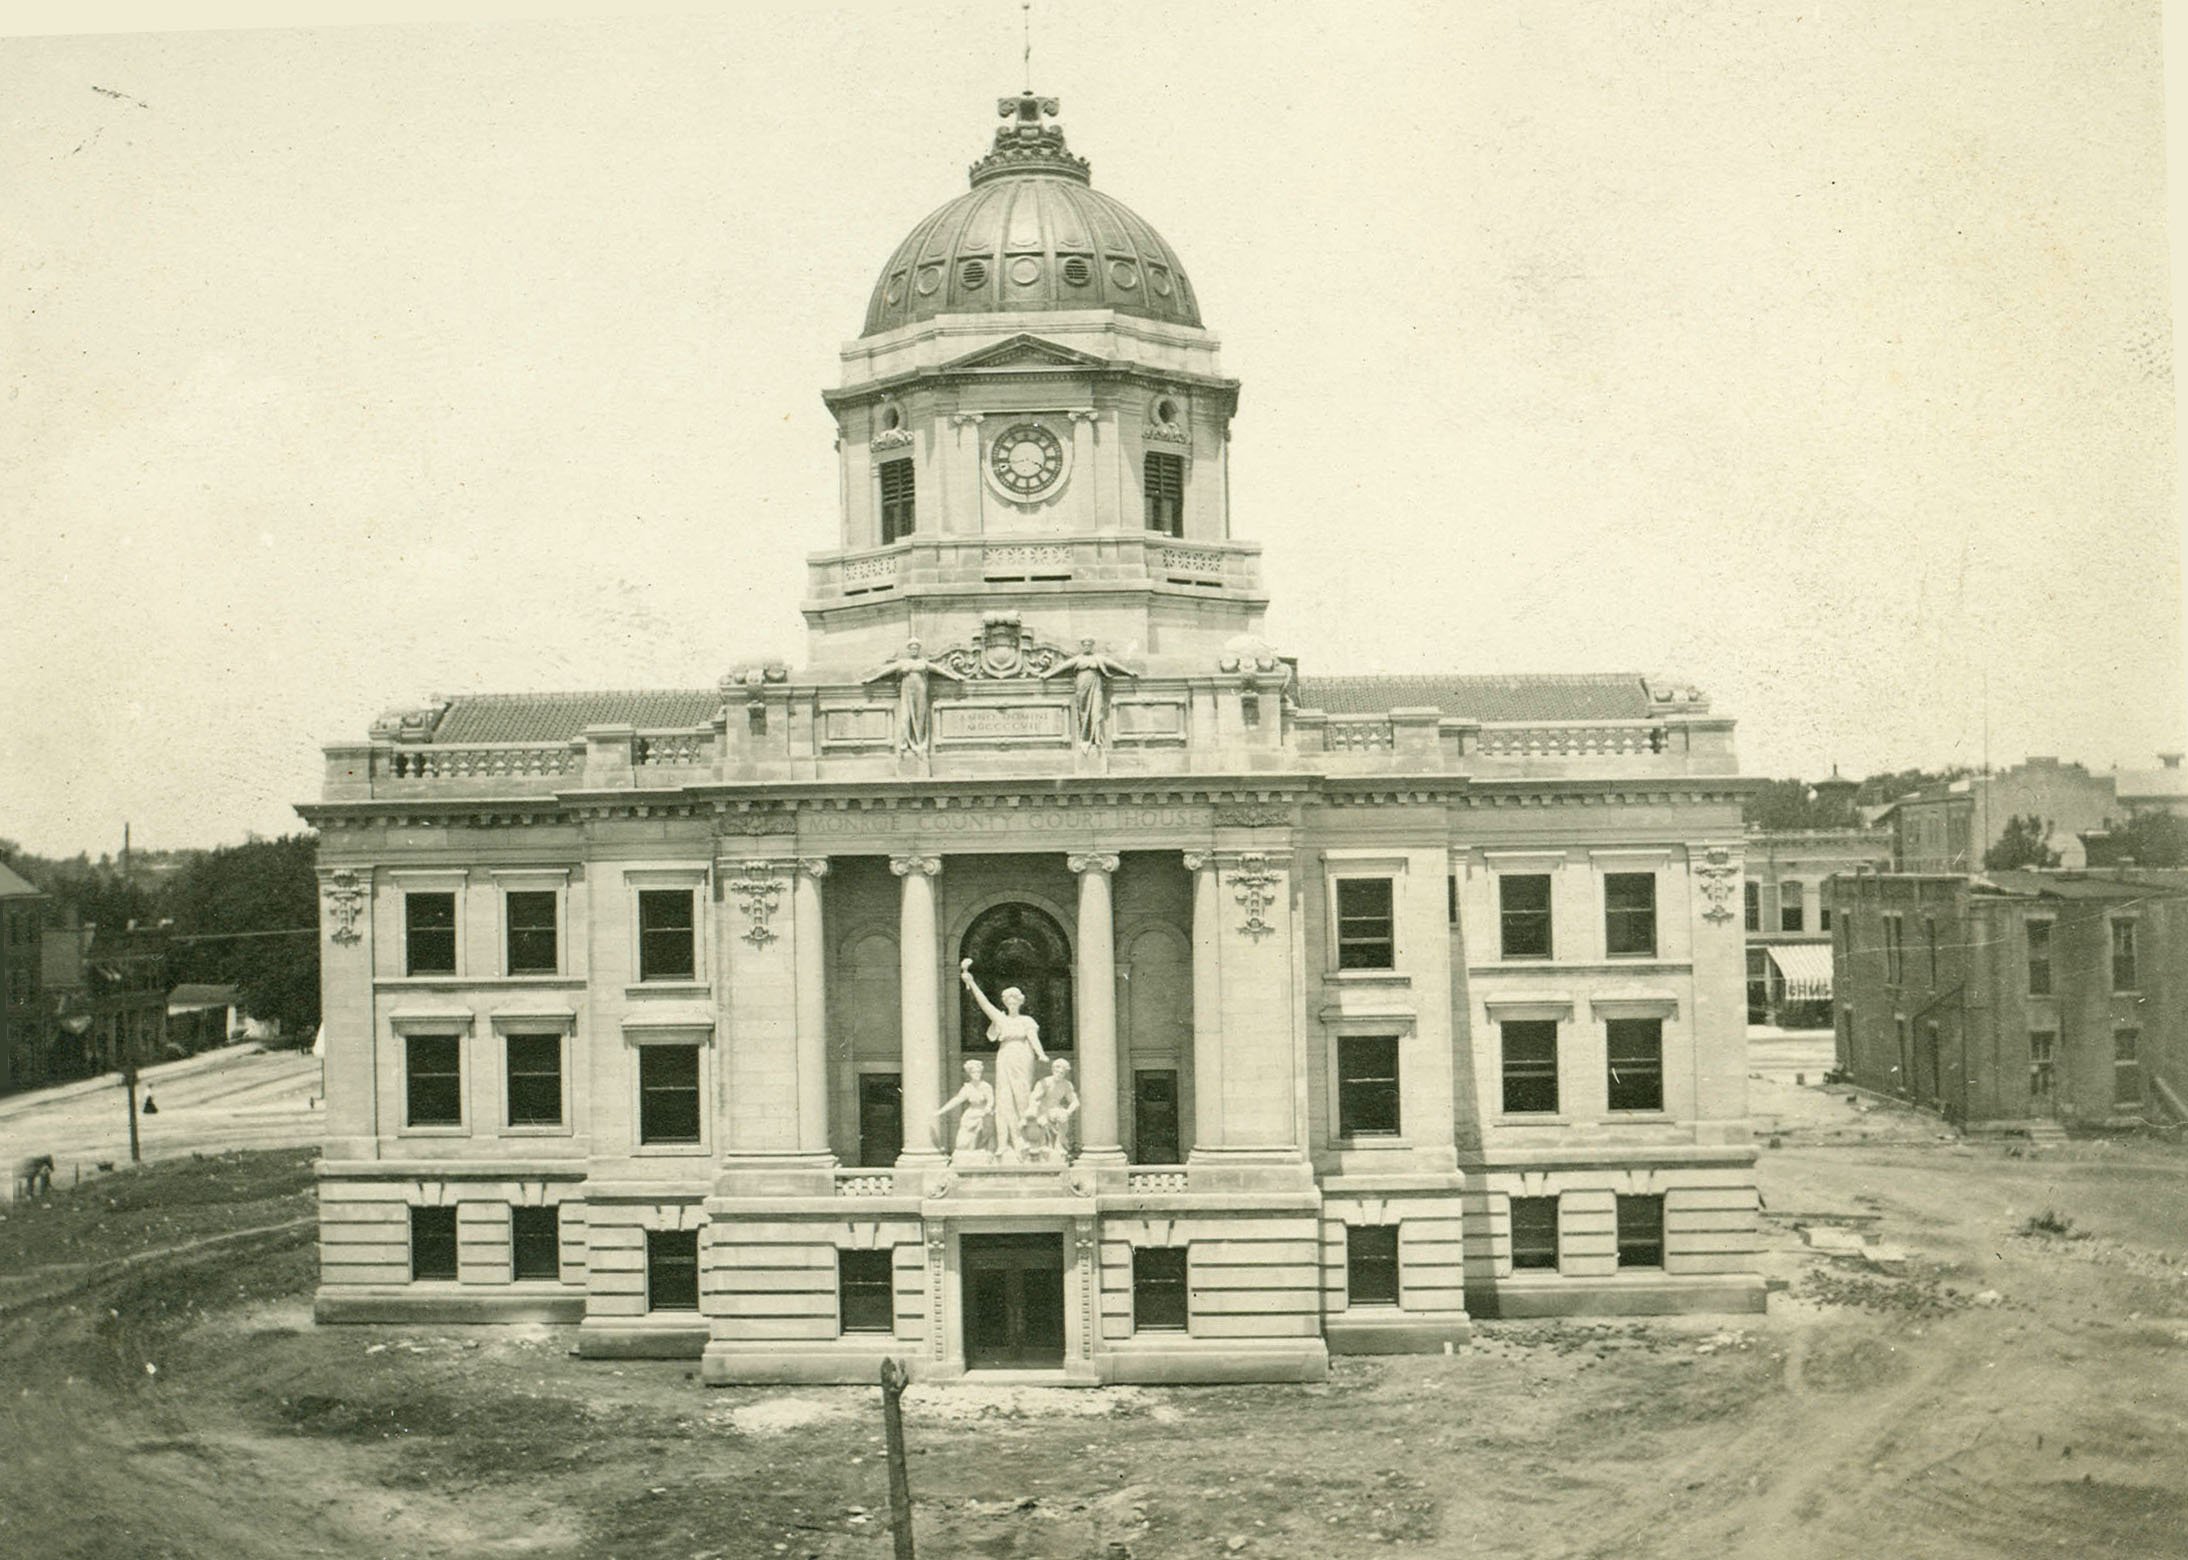 The new courthouse building was built with locally quarried limestone, a popular building material of the time. The need for this limestone for other architectural projects both local and elsewhere created a boom in Indiana's economy.